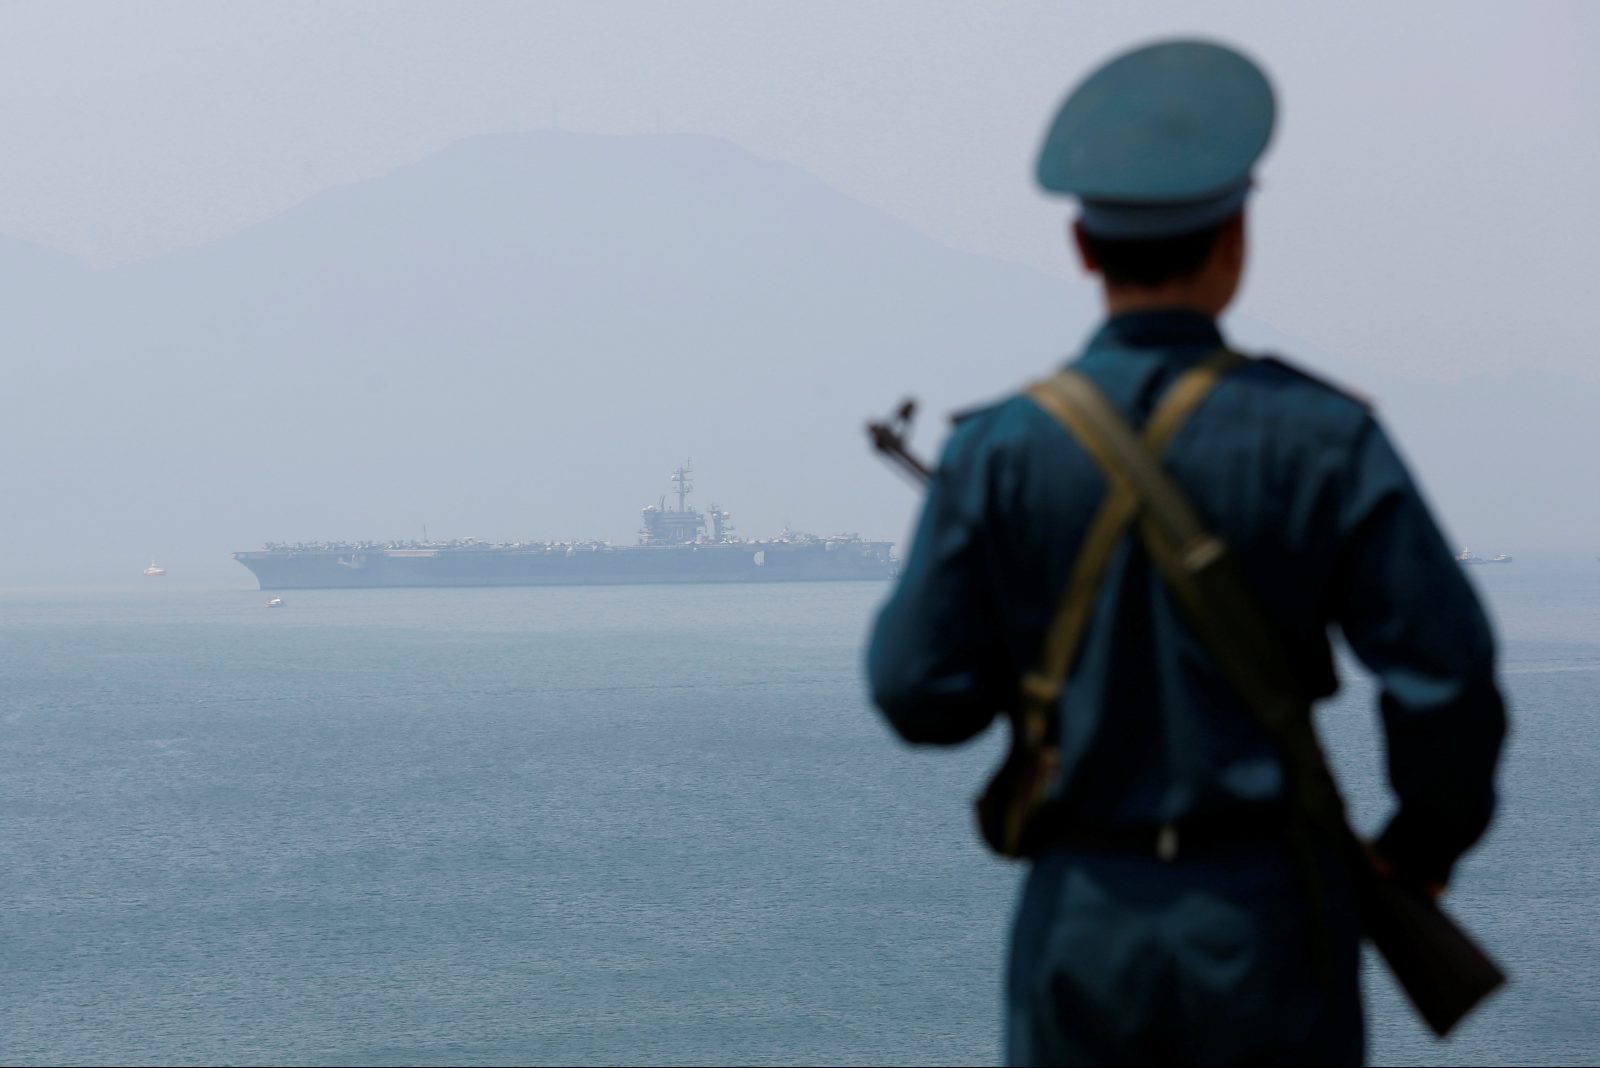 A Vietnamese soldier keeps watch in front of U.S. aircraft carrier USS Carl Vinson